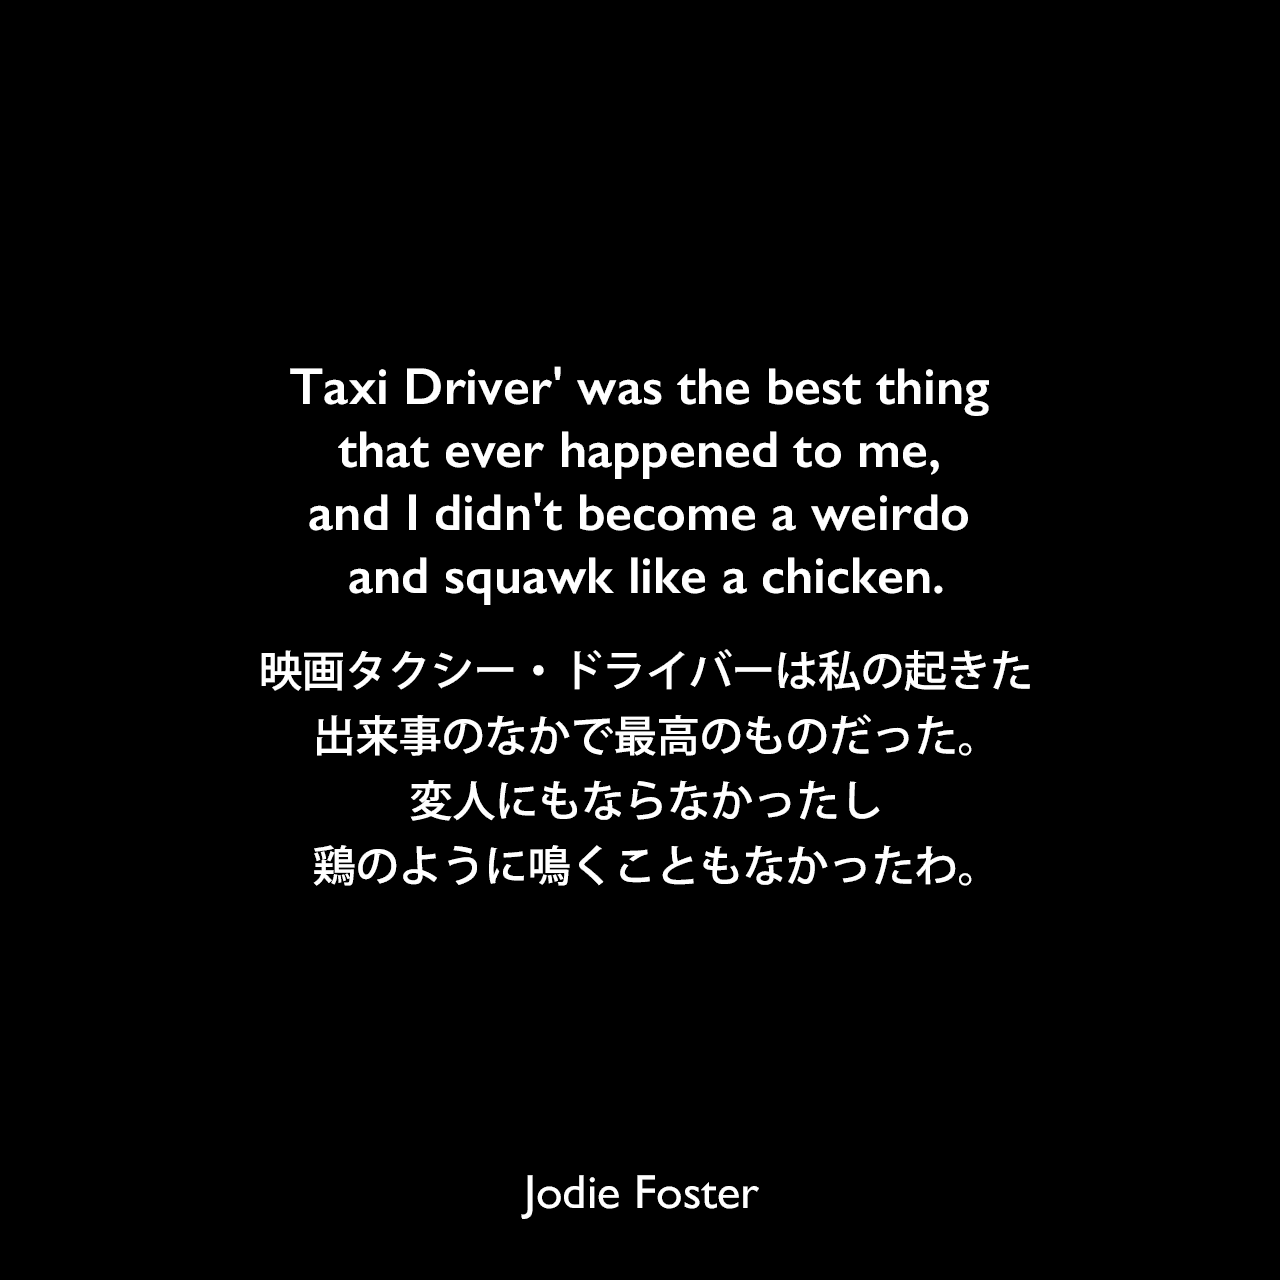 Taxi Driver' was the best thing that ever happened to me, and I didn't become a weirdo and squawk like a chicken.映画タクシー・ドライバーは私の起きた出来事のなかで最高のものだった。変人にもならなかったし、鶏のように鳴くこともなかったわ。Jodie Foster